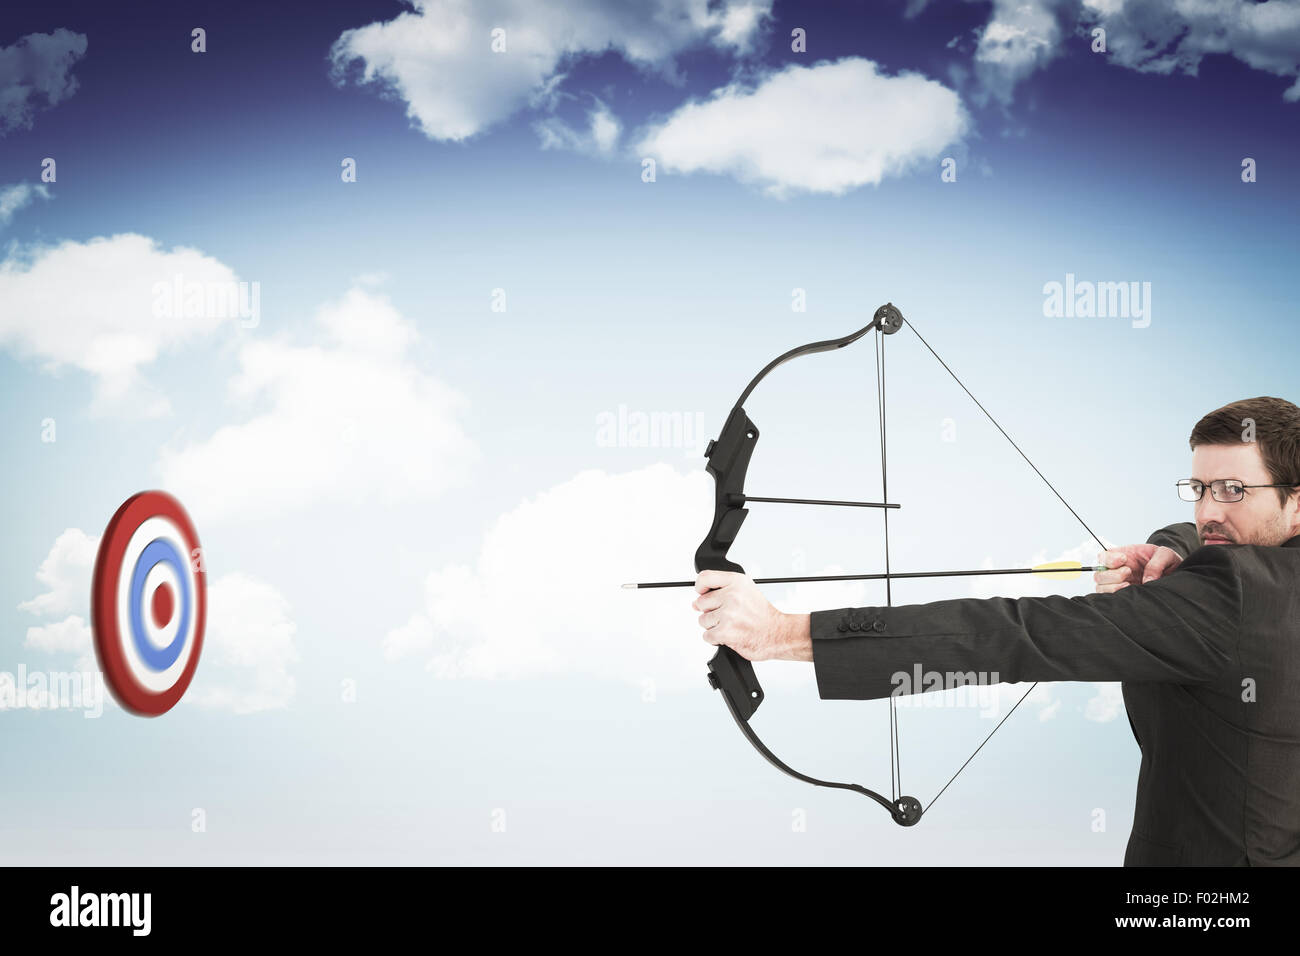 Composite image of businessman shooting a bow and arrow Stock Photo